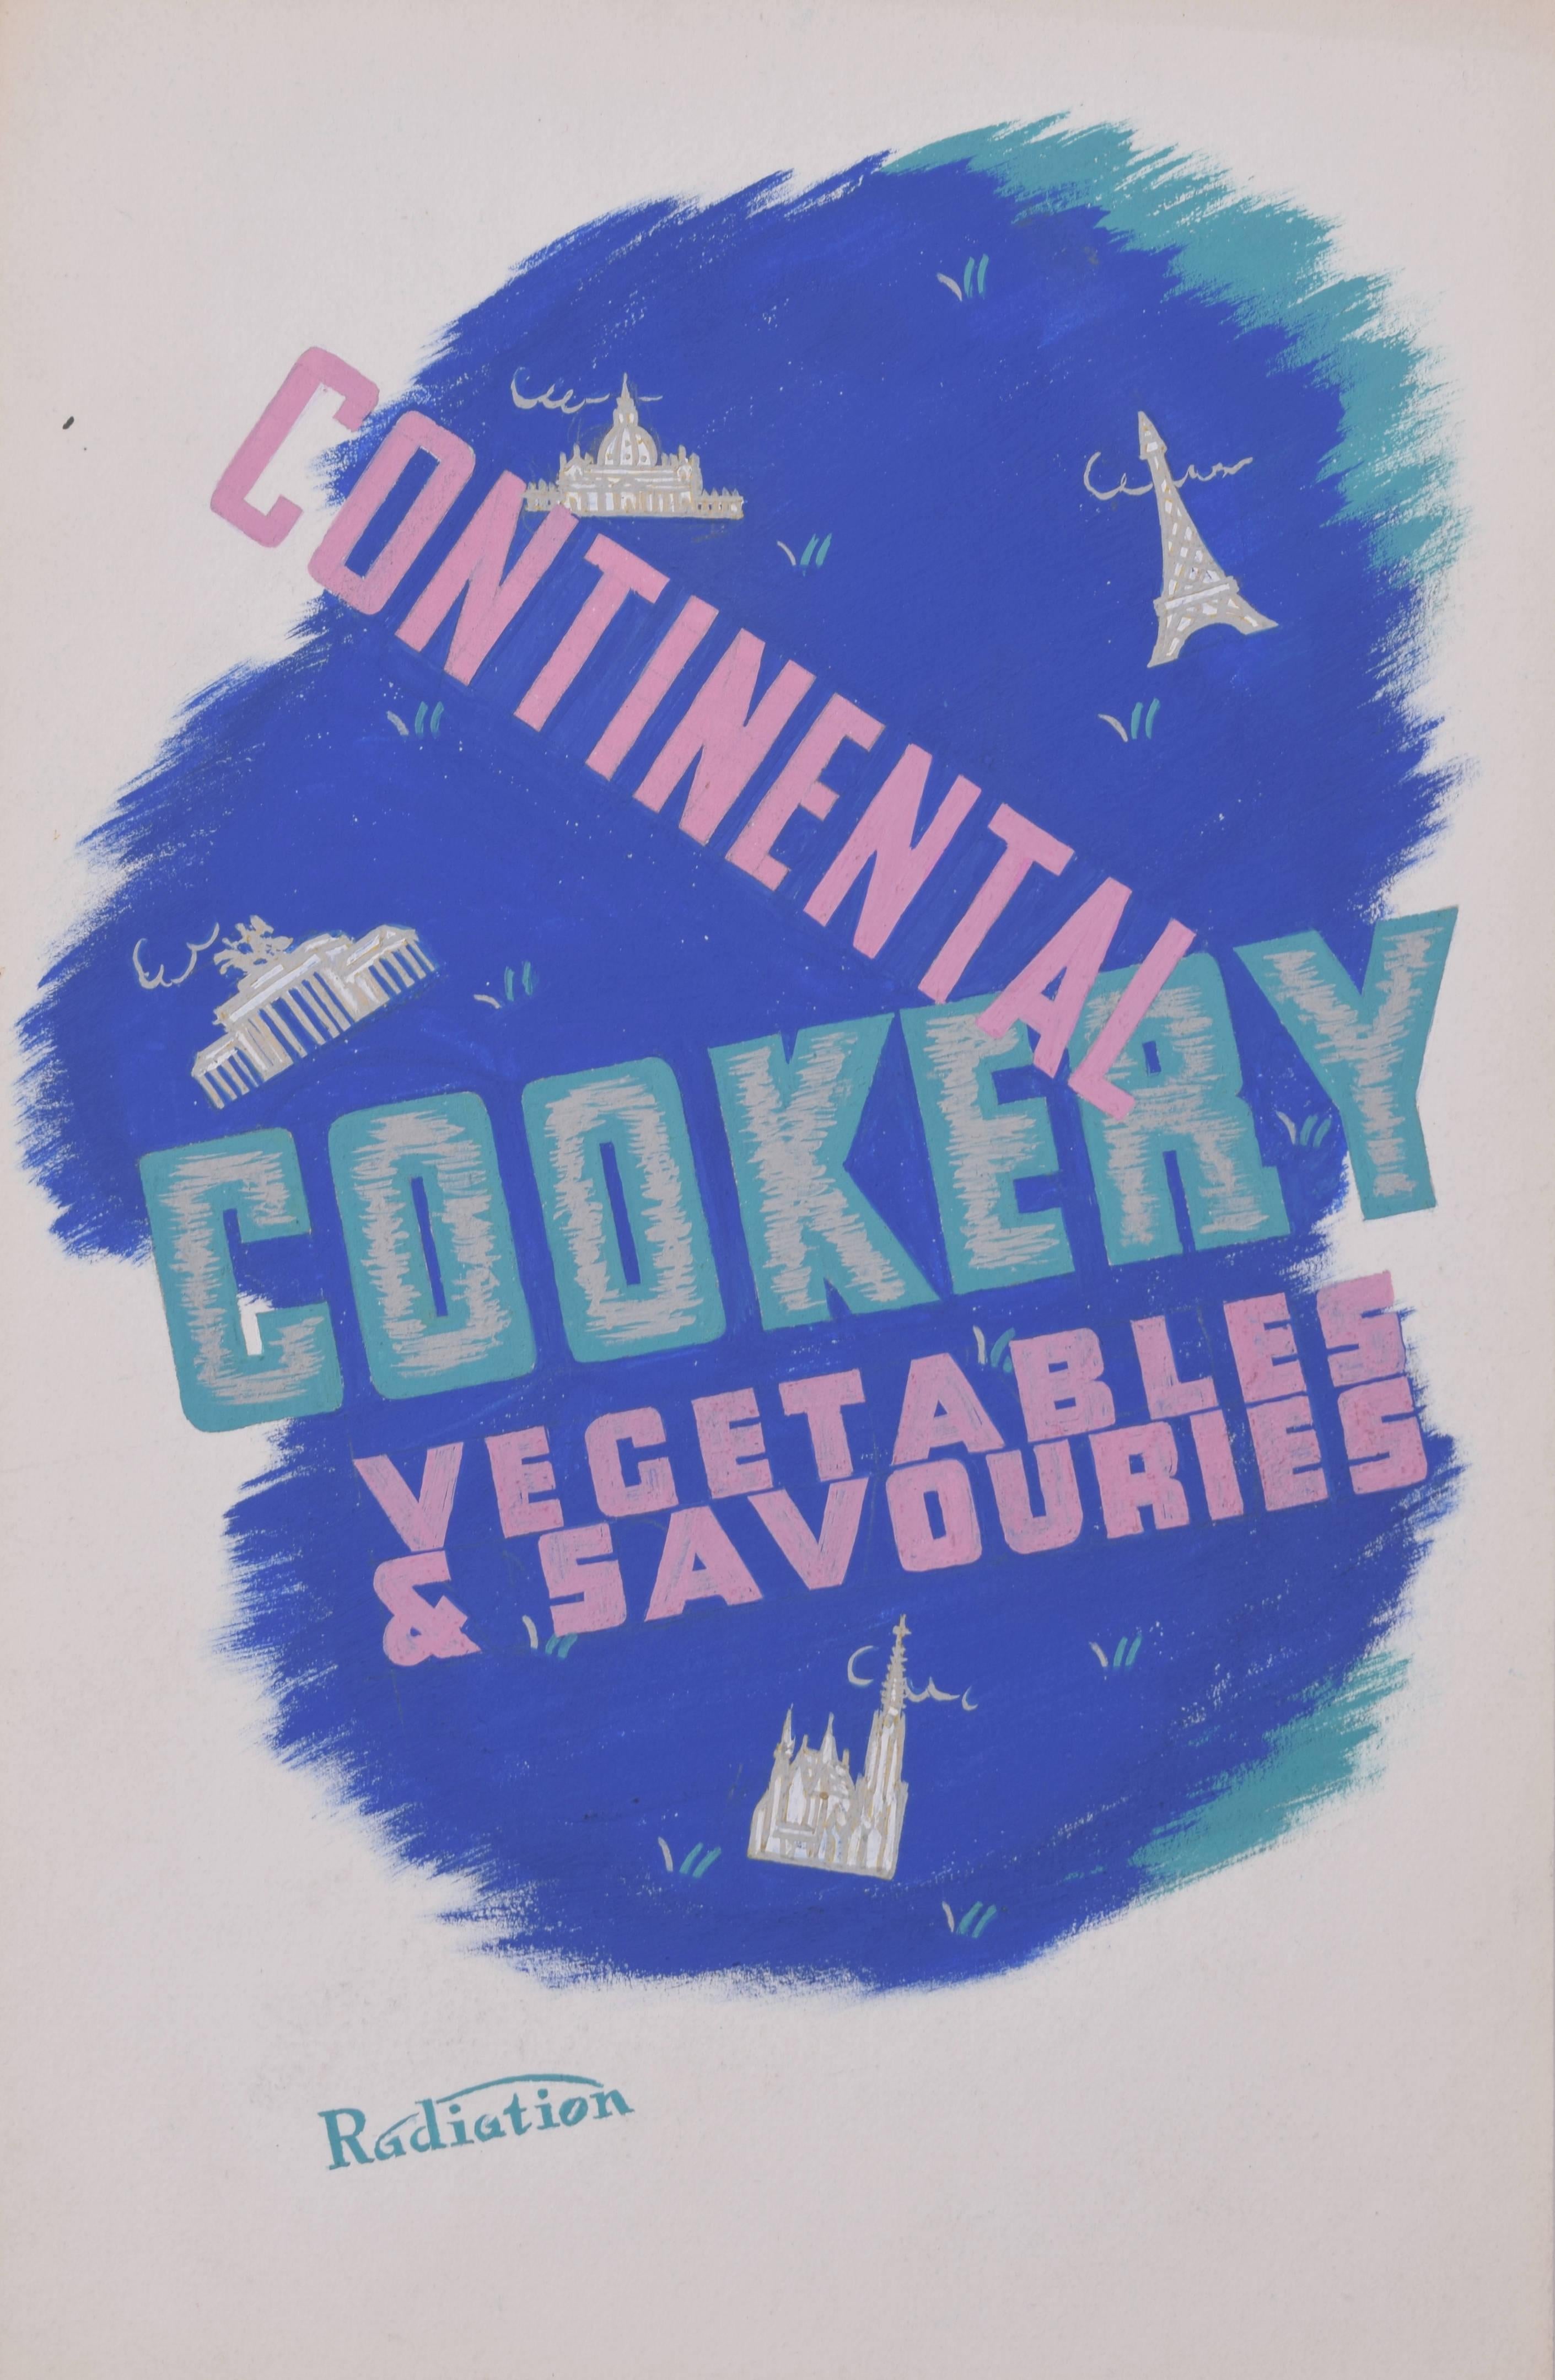 To see more, scroll down to "More from this Seller" and below it click on "See all from this Seller."

Brownbridge (flourished 1930s - 1940s)
Continental Cookery Radiation cooker brochure design
Gouache
21.5 x 14 cm

Supplied with a copy of the